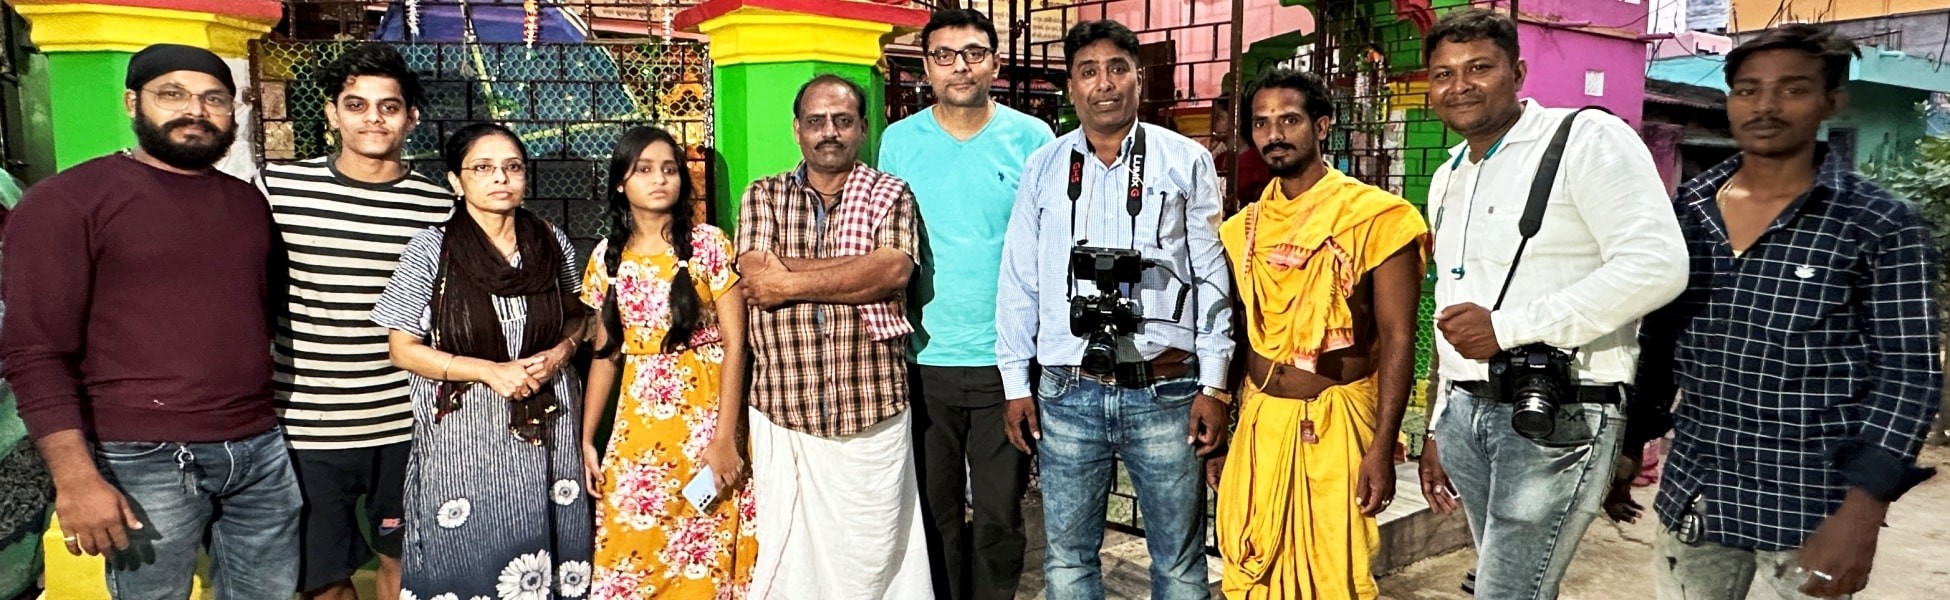 film production services in Agra, video production services in Agra, tv production services in Agra, production services in Agra